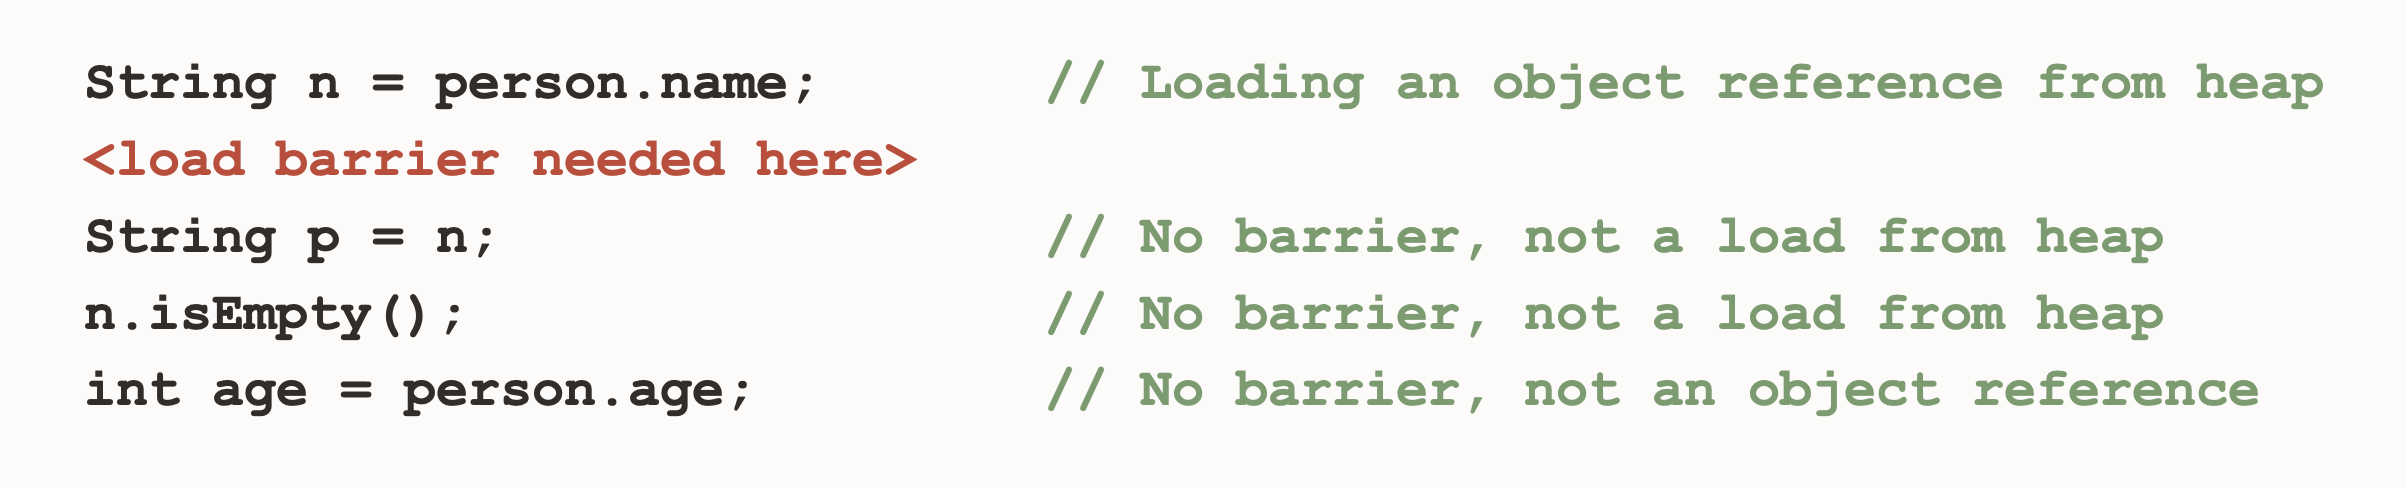 load-barriers.png